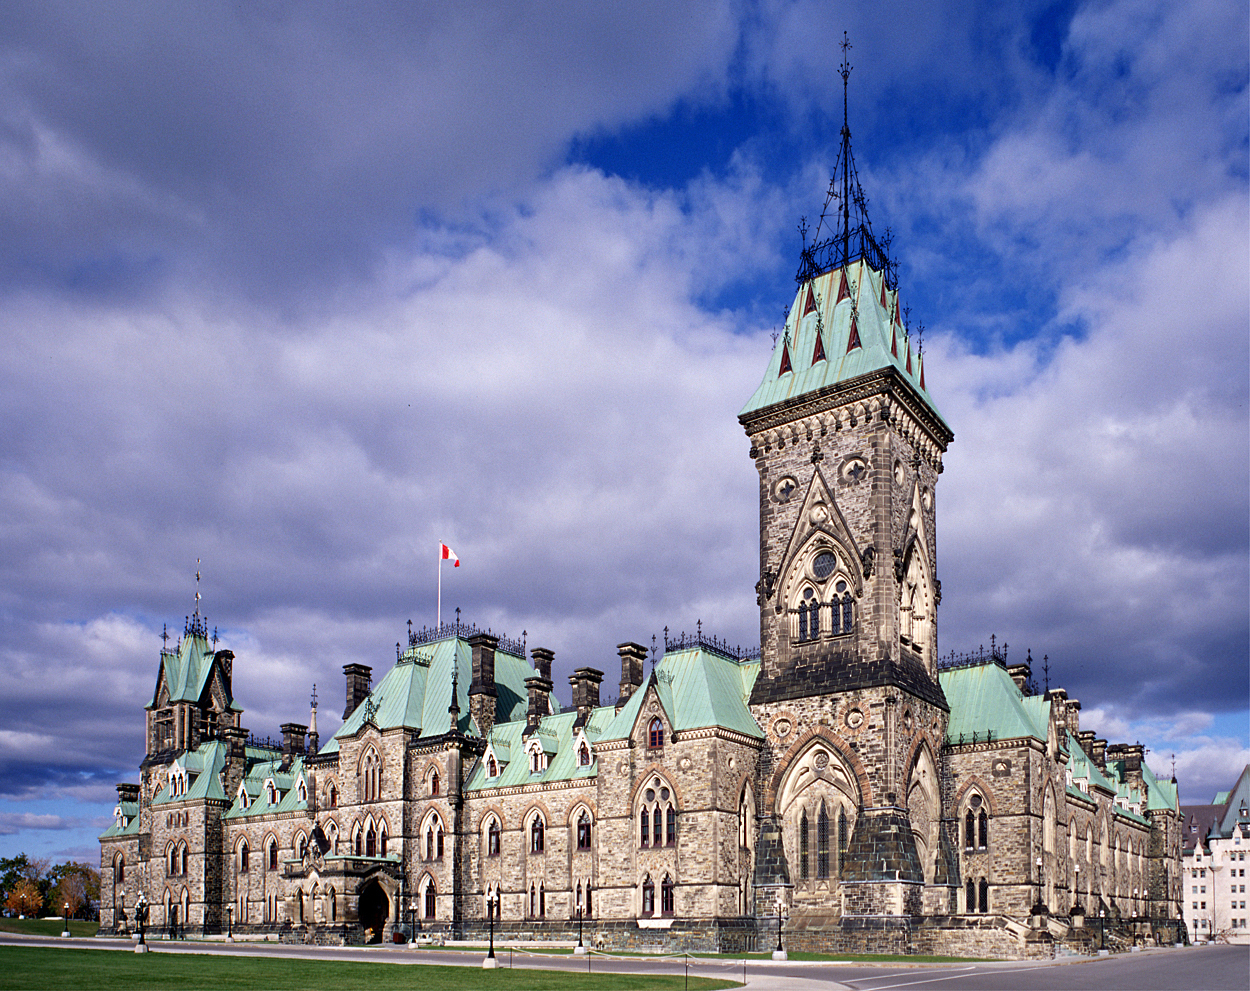 A colourful combination of Nepean sandstone, Ohio sandstone and red Potsdam stone, combined with soaring copper mansard roofs, make East Block one of Canada’s most distinctive Gothic Revival buildings. (Photo credit: Parliament of Canada)